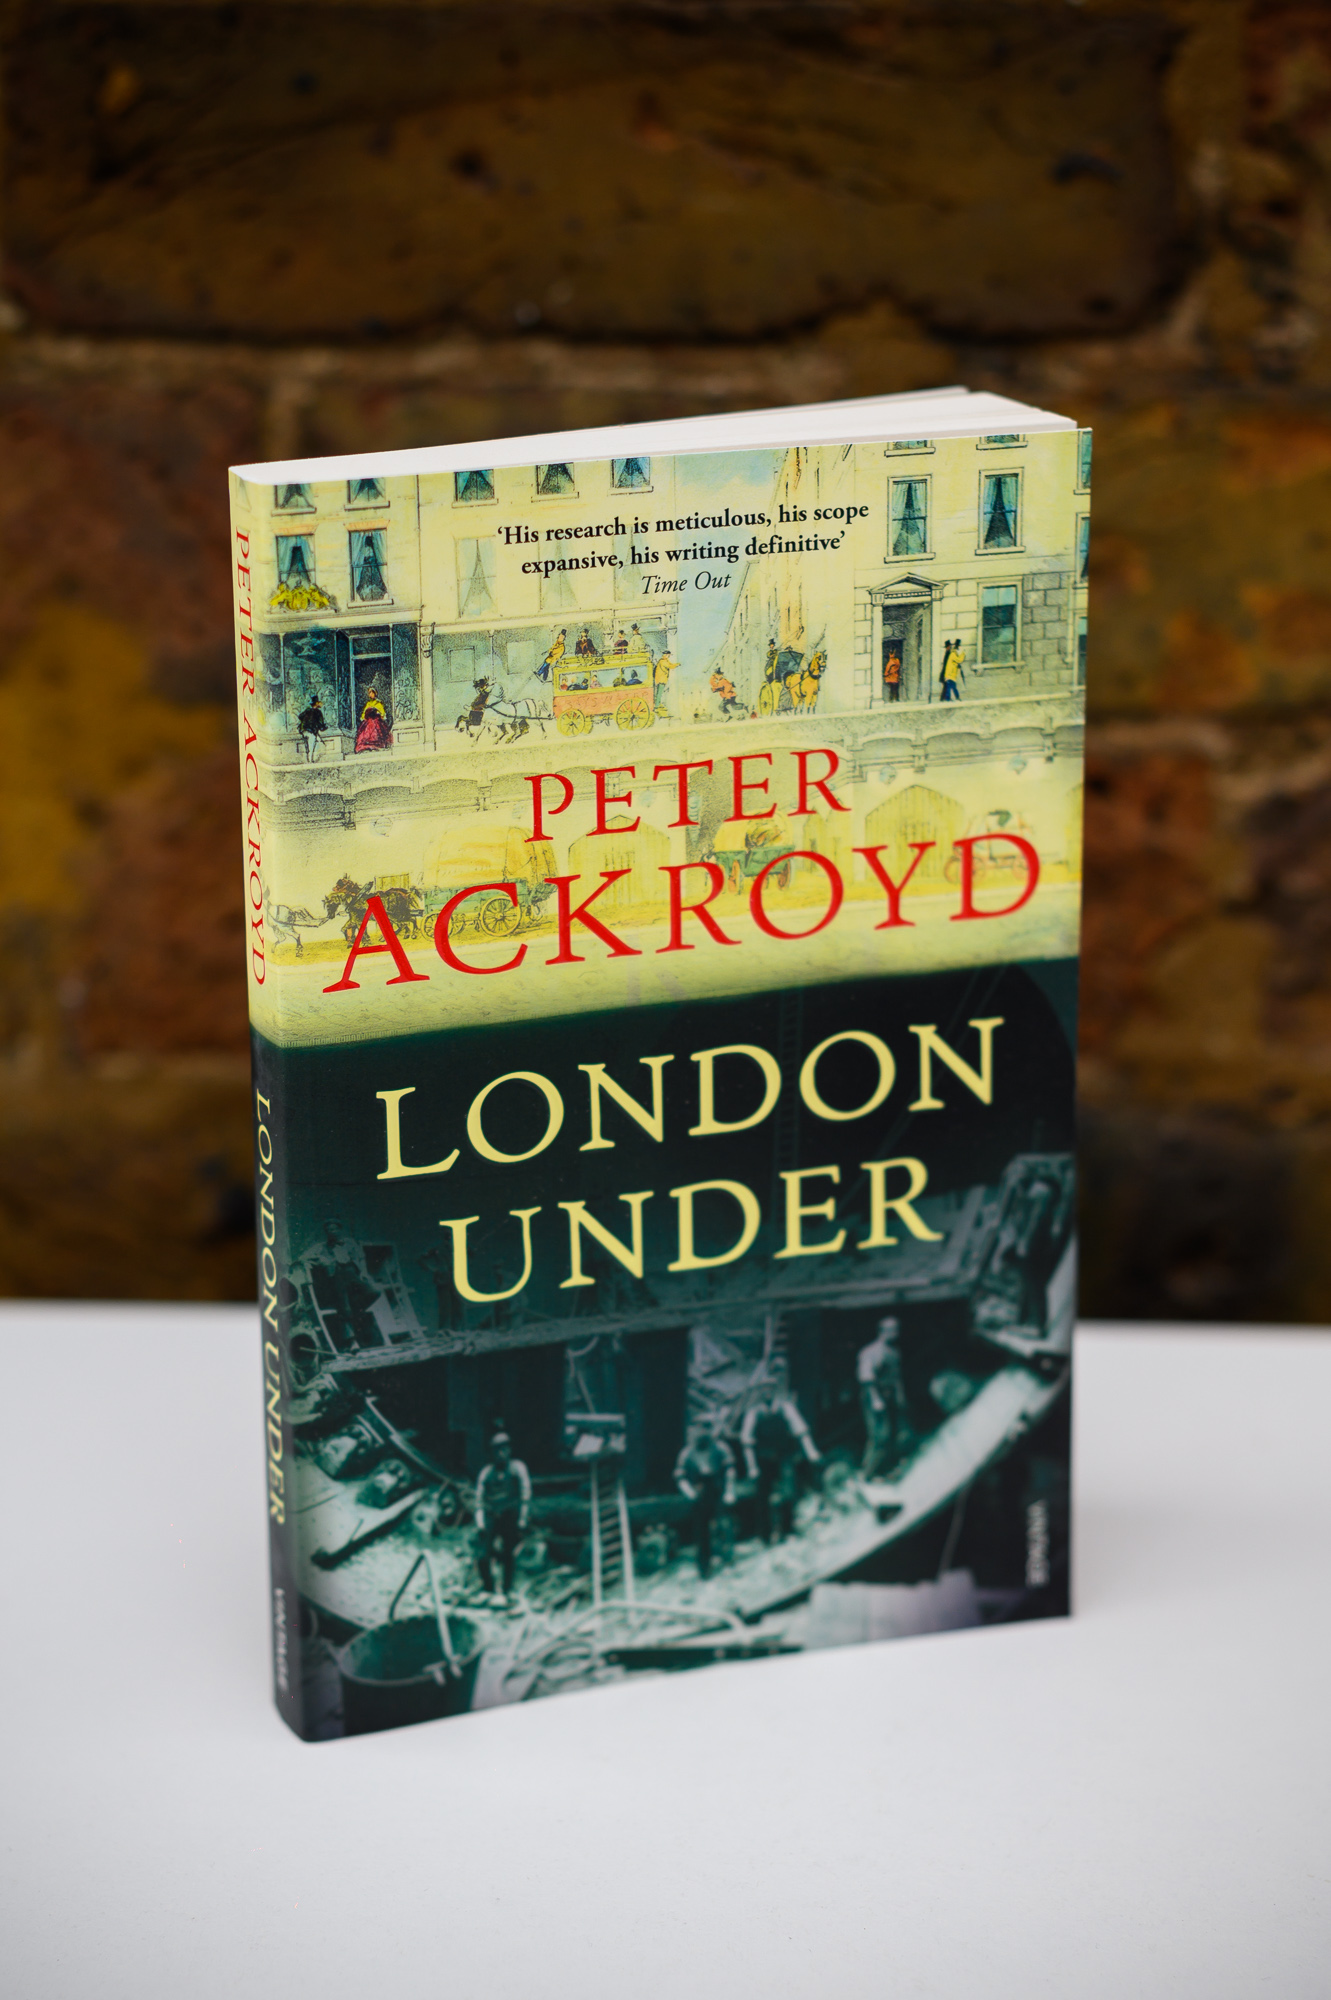 London Under London by Richard Trench